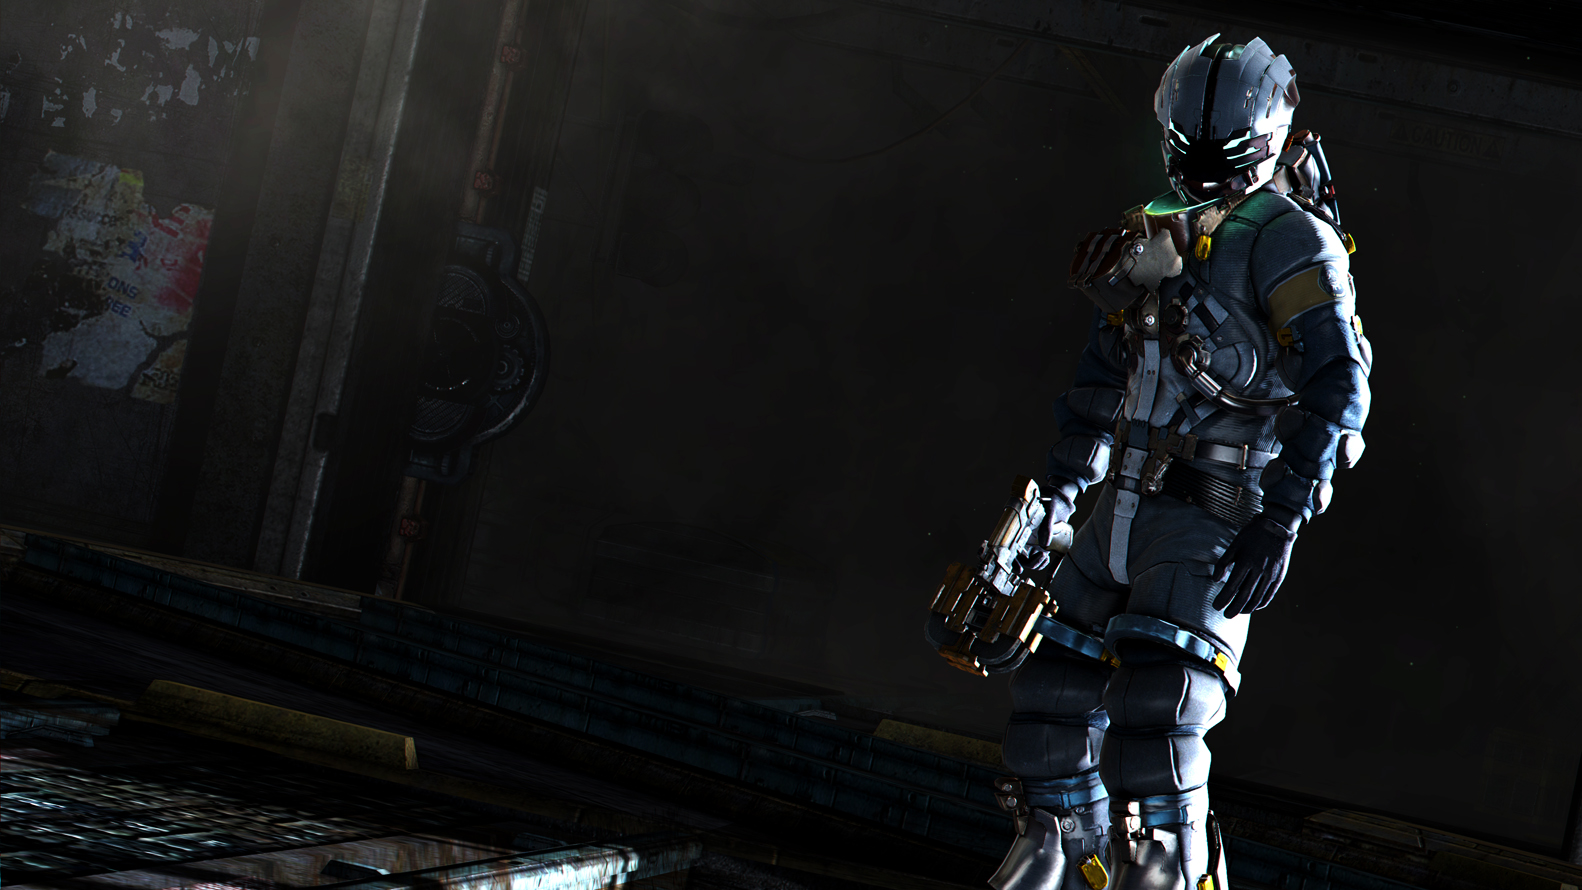 Dead Space 3 2013 Game HD Wallpapers Download Free Wallpapers in HD